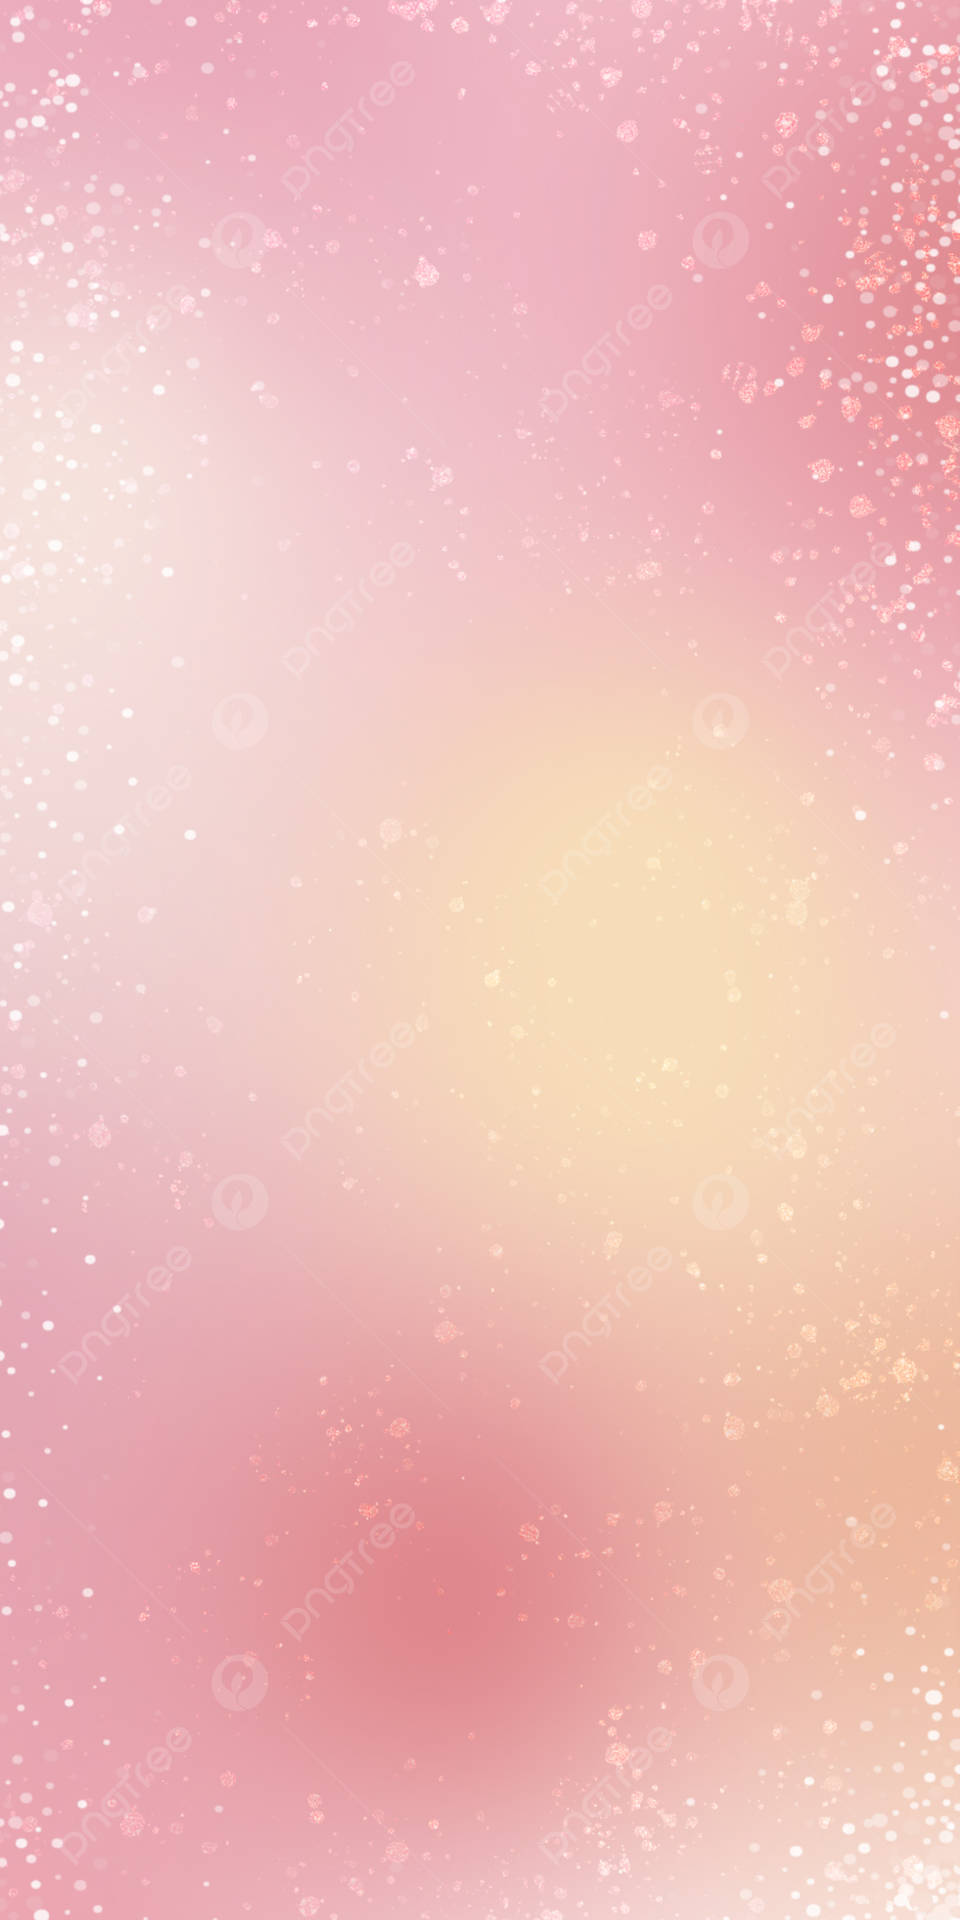 A Pink And Yellow Abstract Background With Dots Wallpaper